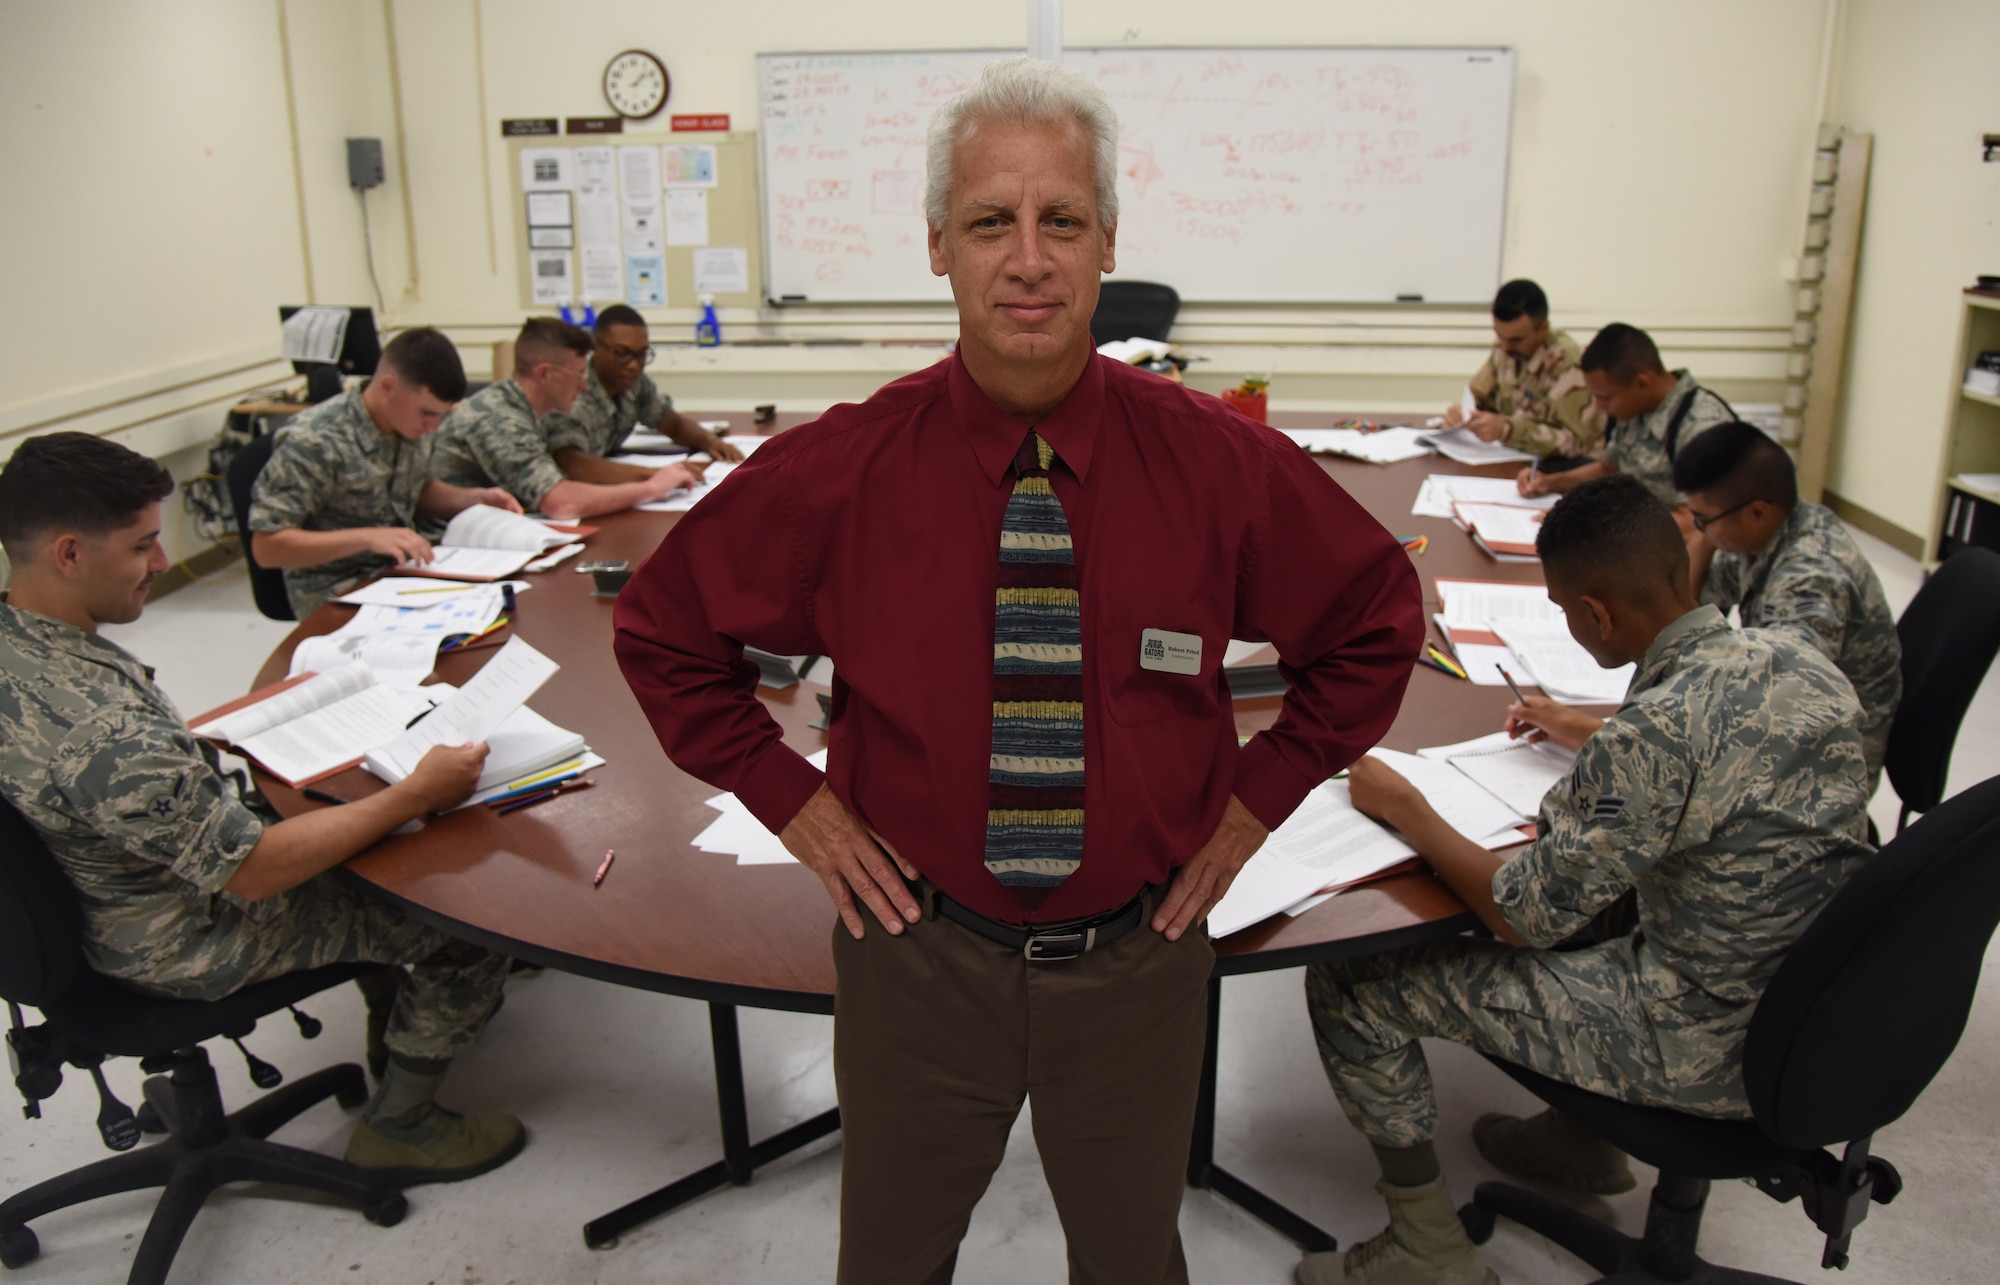 Robert Fried, 334th Training Squadron instructor, poses for a photo inside his classroom at Jones Hall on Keesler Air Force Base, Mississippi, May 28, 2019. Fried was awarded the 2018 Second Air Force Technical Training Instructor Civilian of the Year. (U.S. Air Force photo by Kemberly Groue)